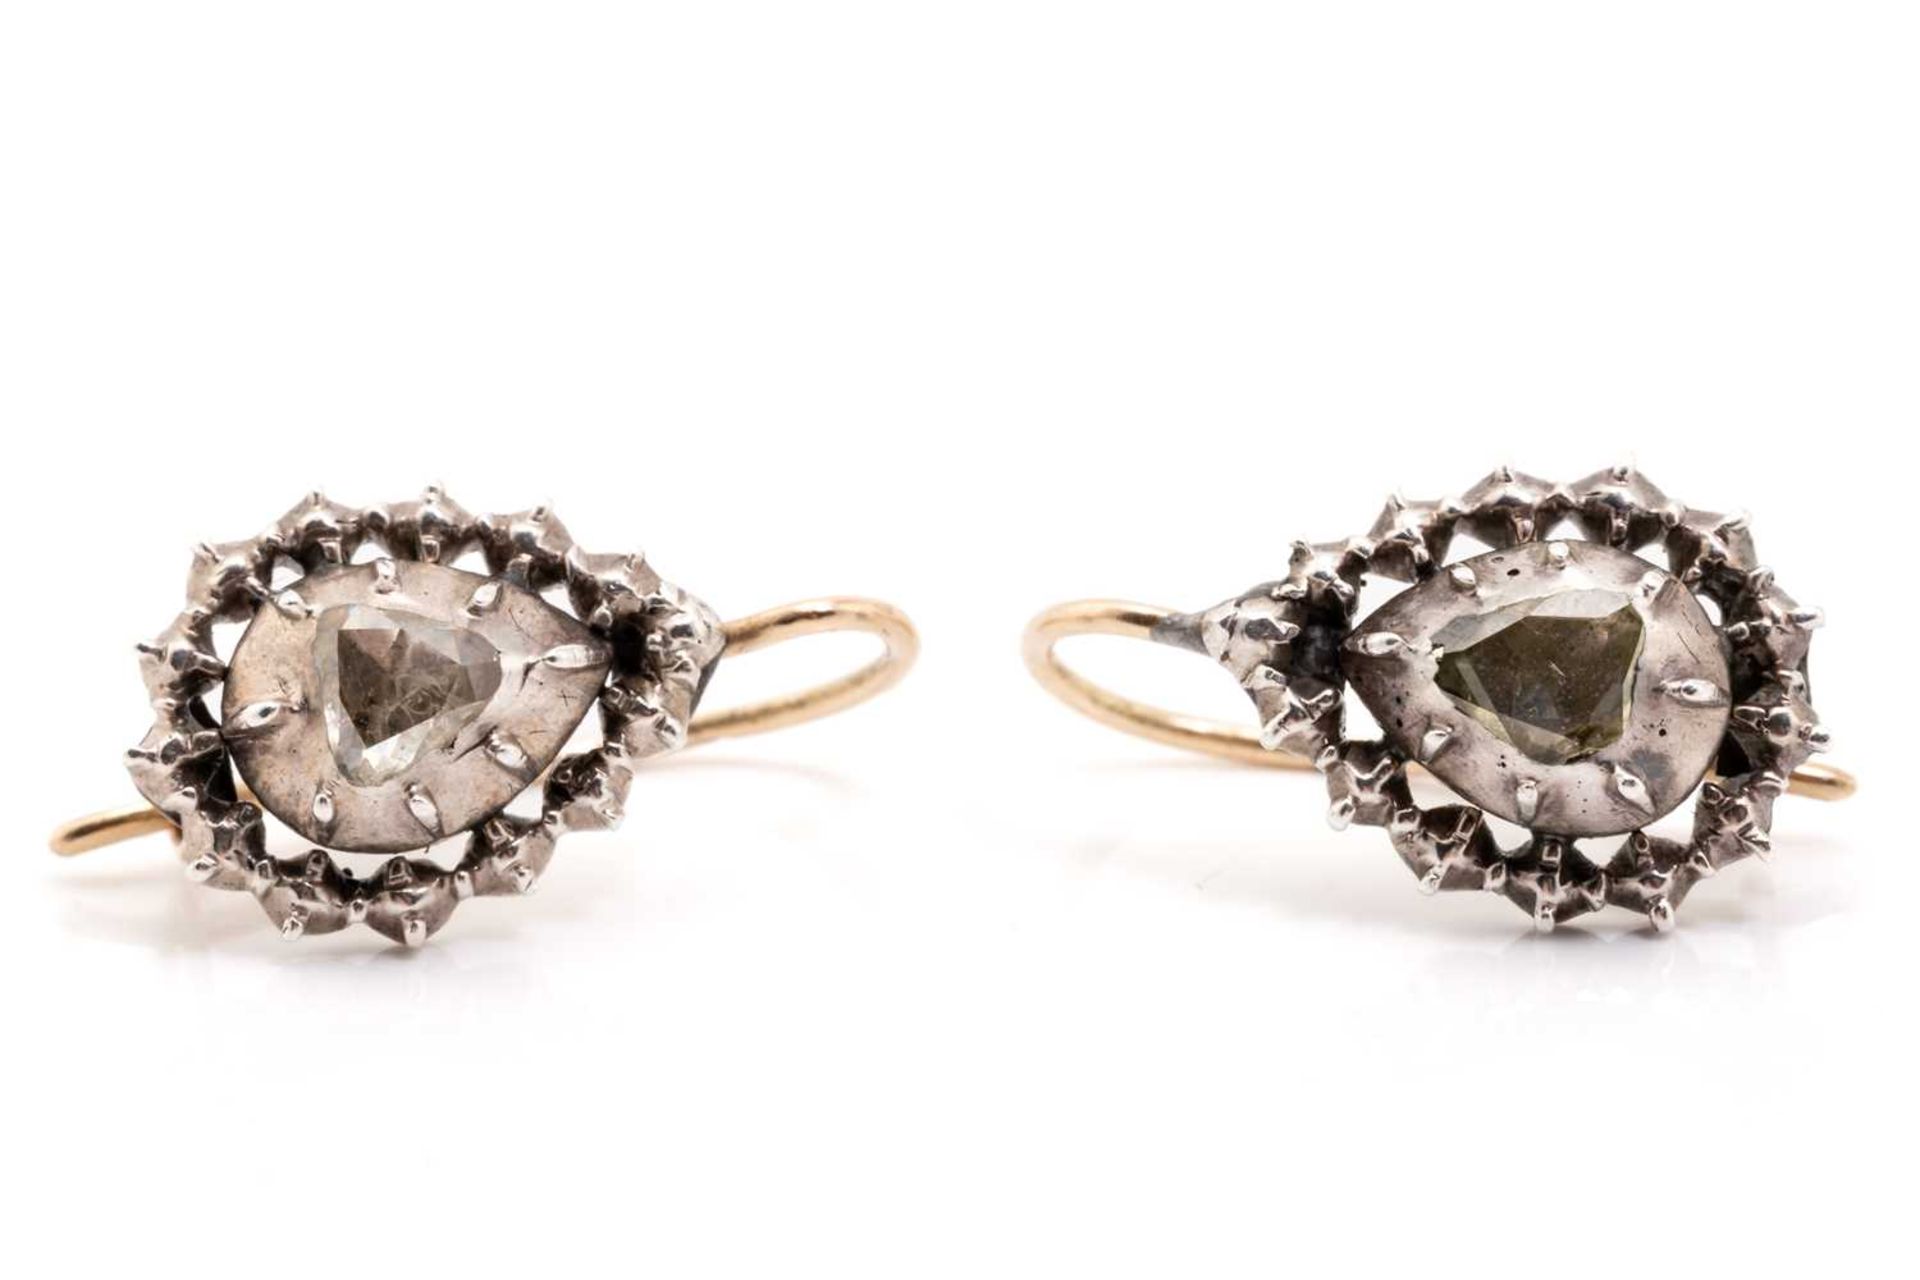 A pair of 19th-century diamond earrings, each encapsulating a pear-shaped rose-cut diamond in a - Image 2 of 4